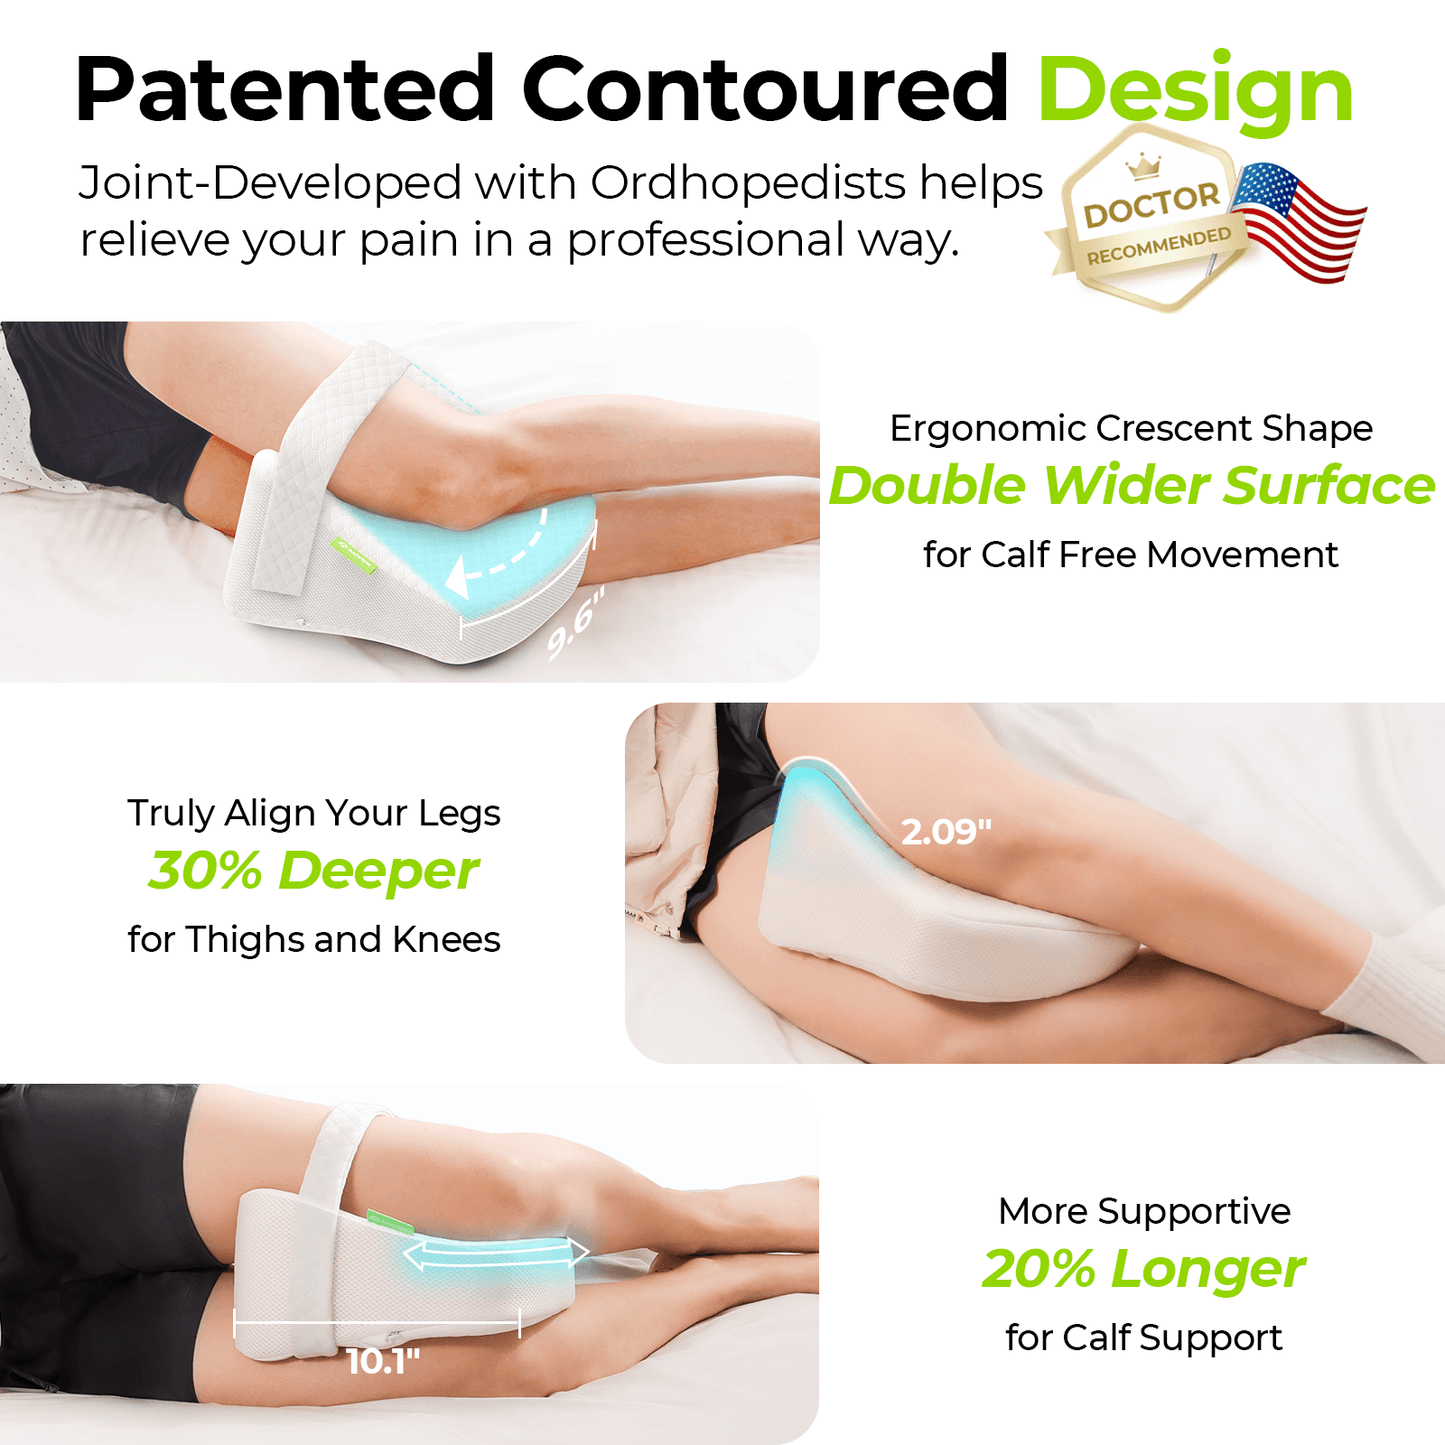 https://auvonhealth.com/cdn/shop/files/auvon-contoured-knee-pillow-for-side-sleepers-joint-developed-with-physicians-cooling-memory-foam-between-leg-pillow-with-adjustable-strap-for-spine-alignment-pain-relief-for-back-hip_a5b6720a-10ac-4296-a3af-c362ab90fa8b.png?v=1686019964&width=1445